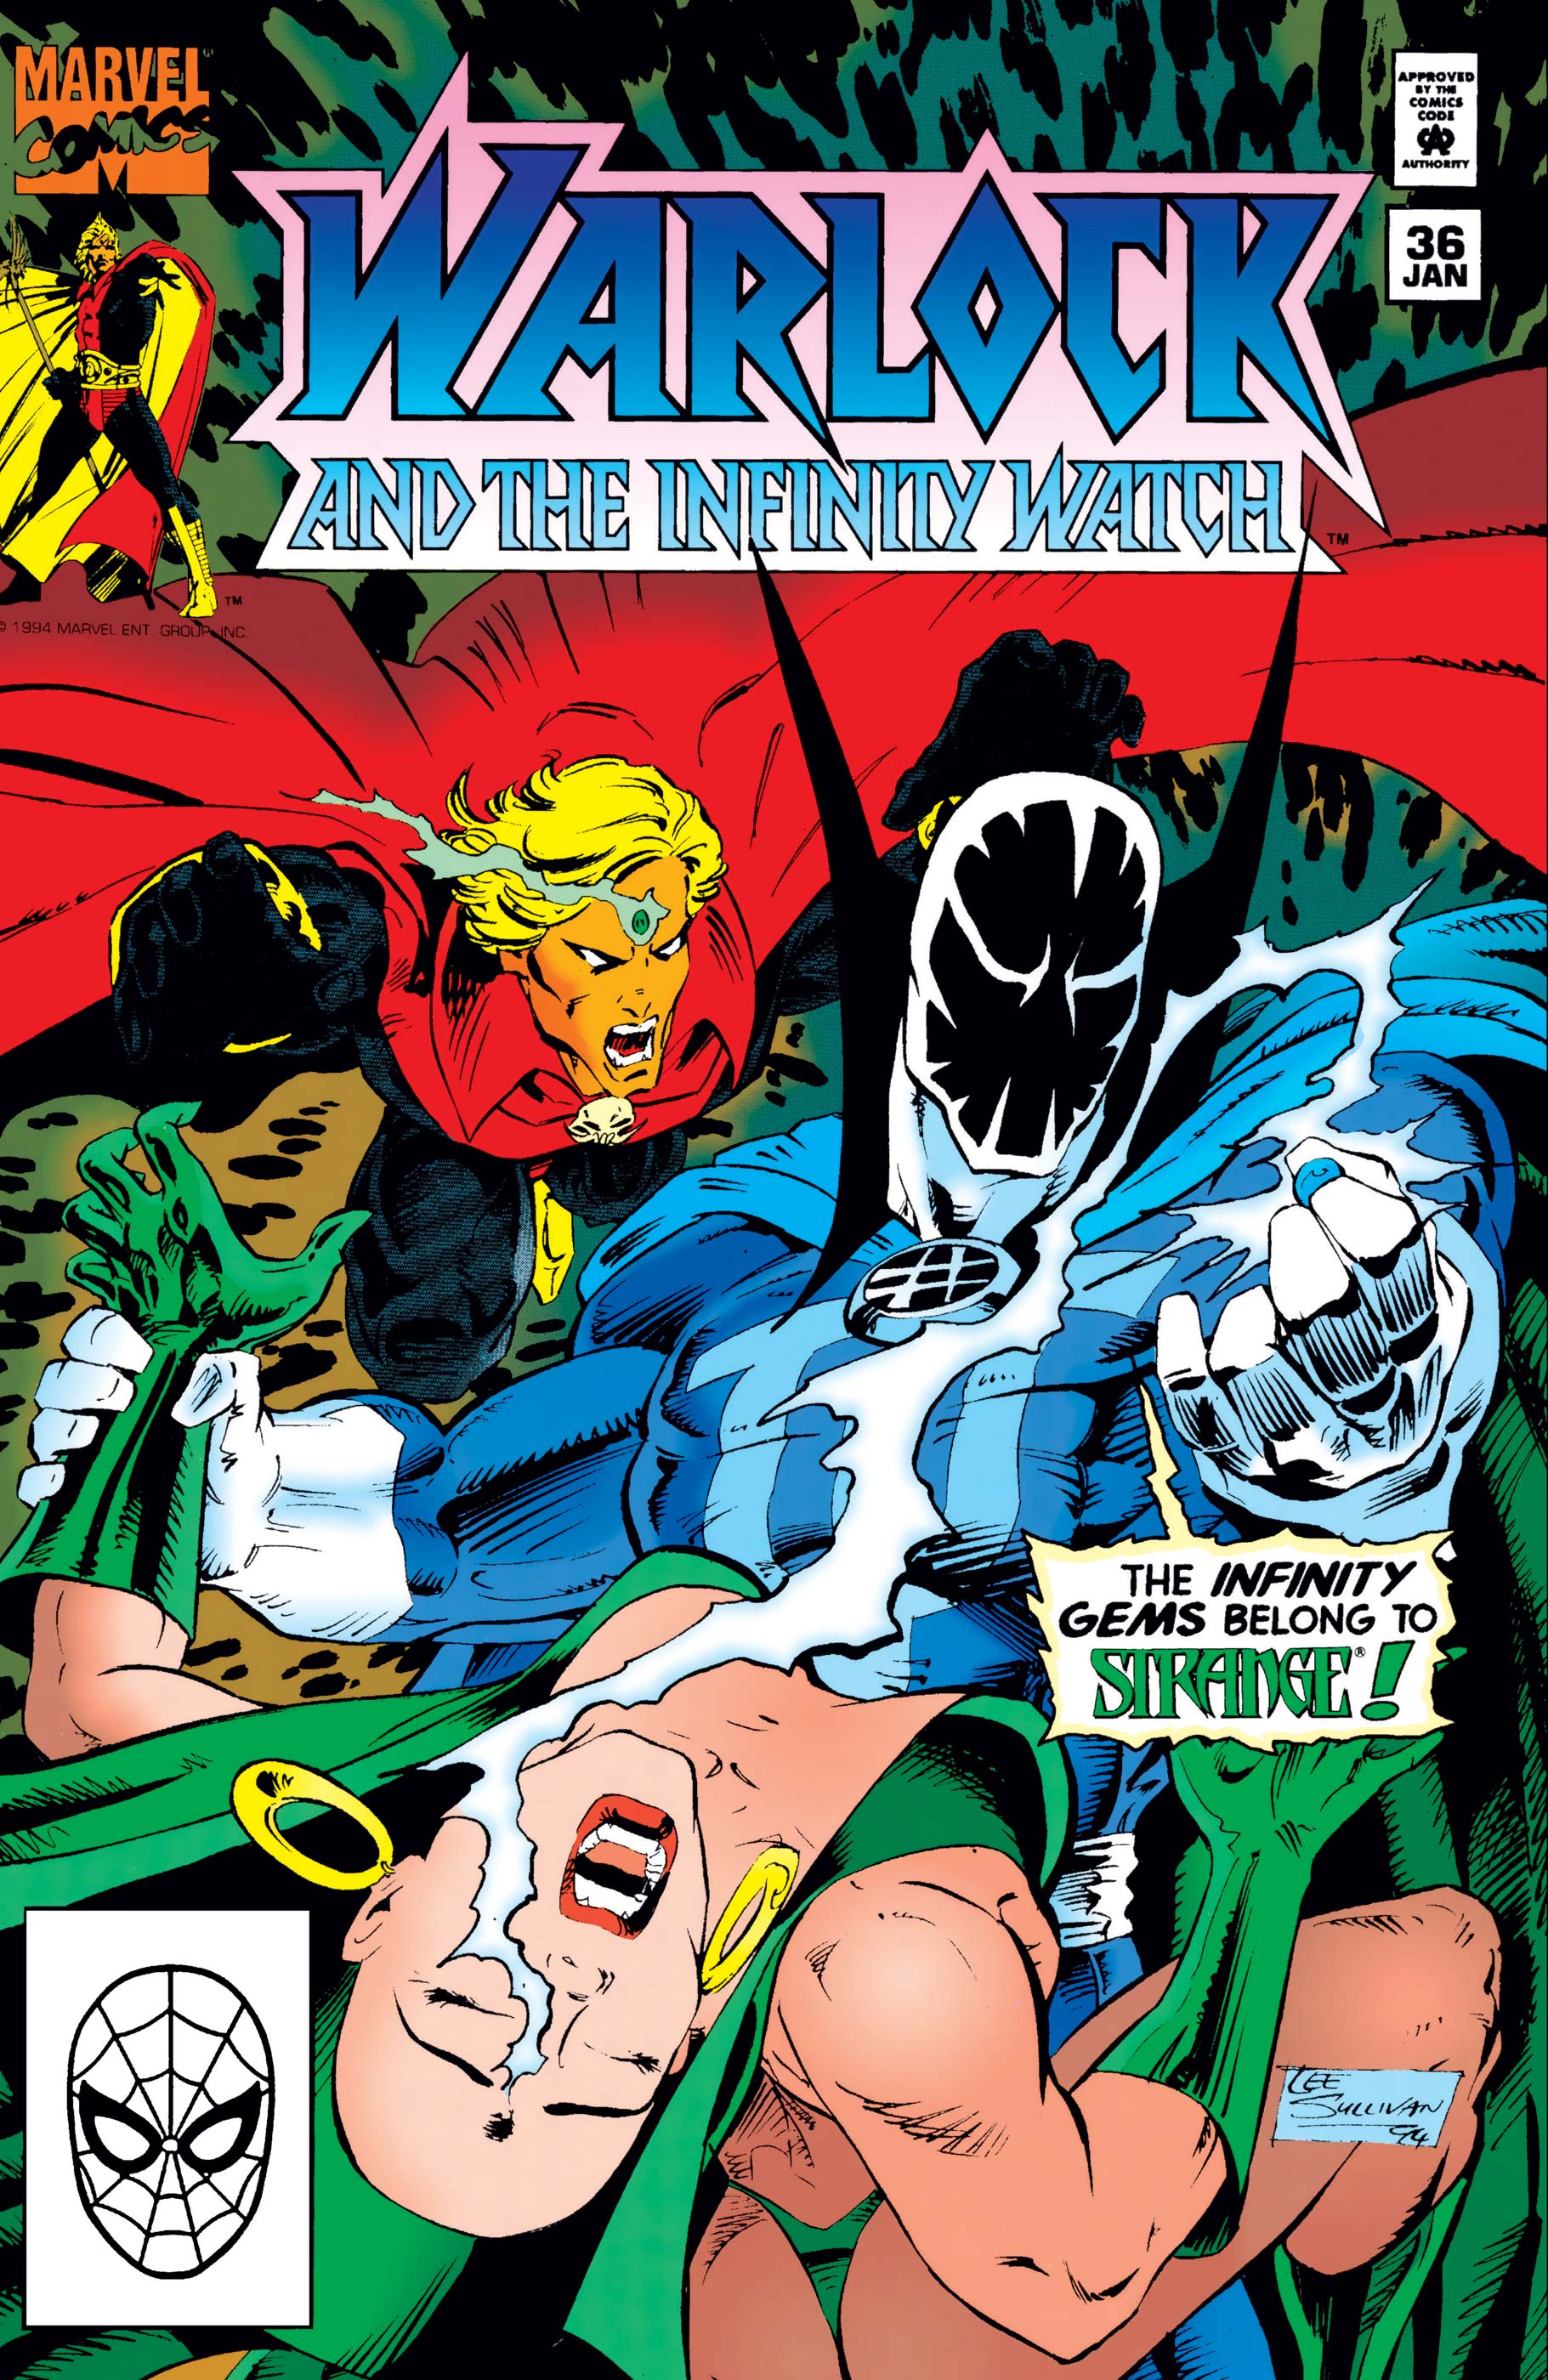 Warlock and the Infinity Watch (1992) #36